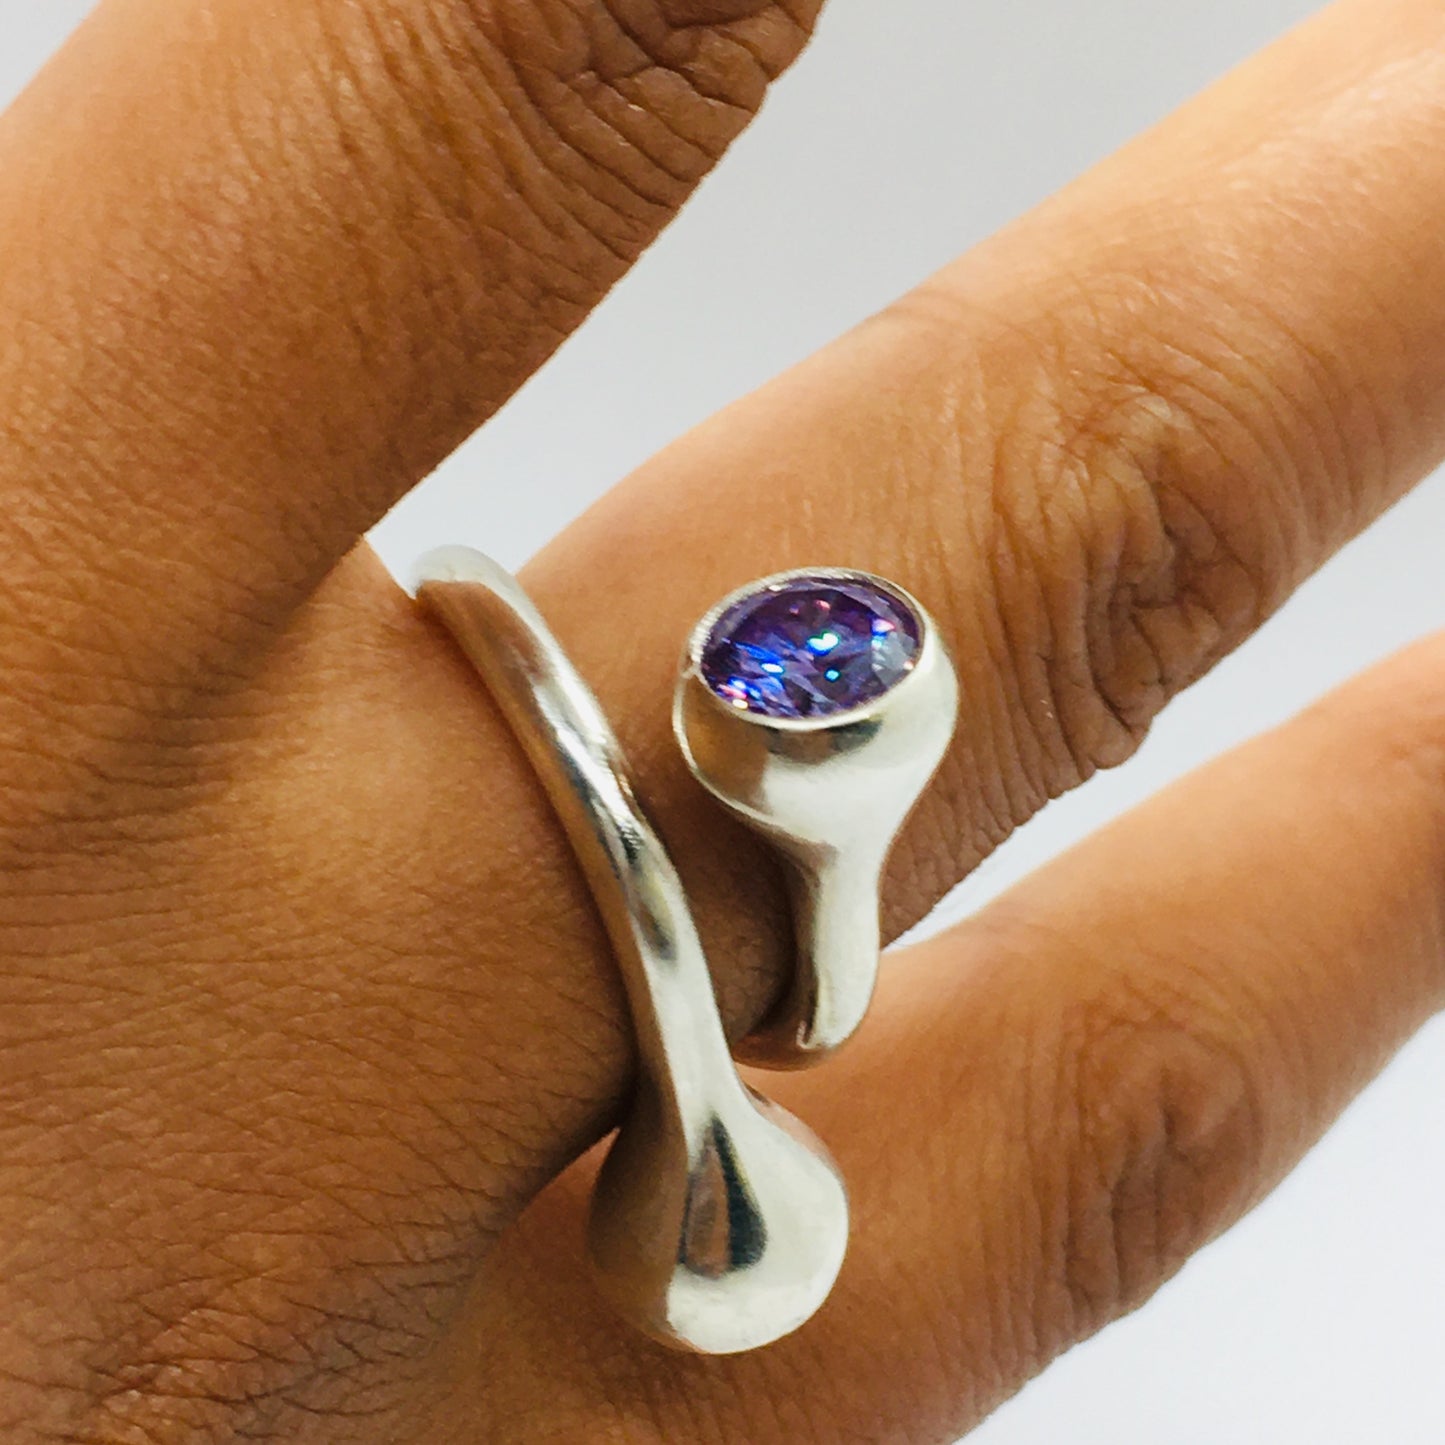 Twisted Gum Nut Ring with Lavender Cubic Zirconia